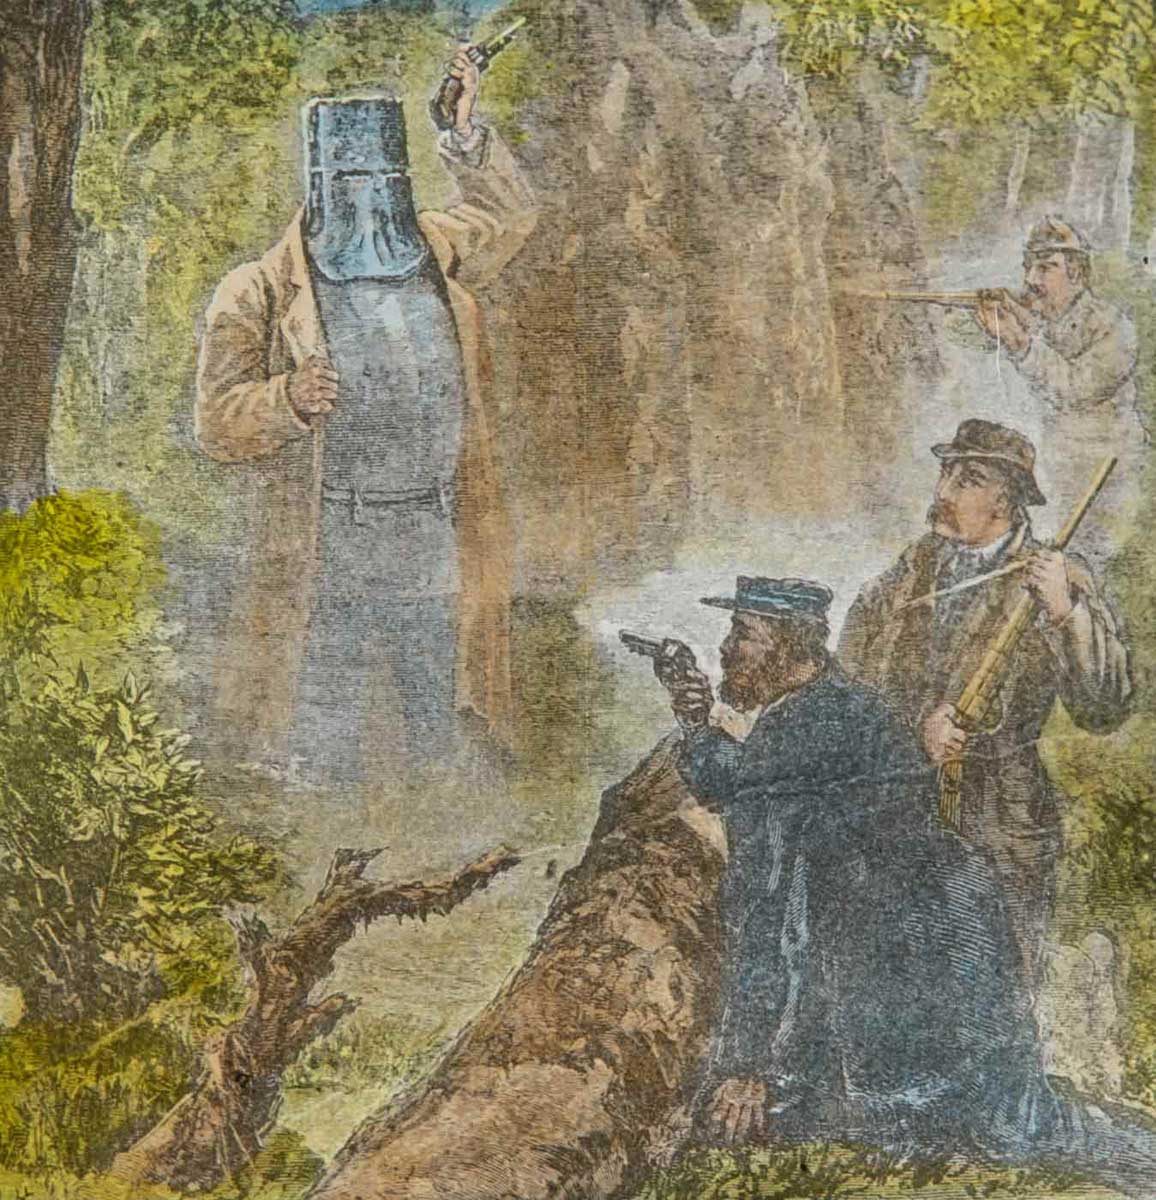 Glass slide depicting Ned Kelly in armour with revolver raised above his head in bush environment. Two men with rifles and one with revolver crouched pointing guns at Kelly. - click to view larger image